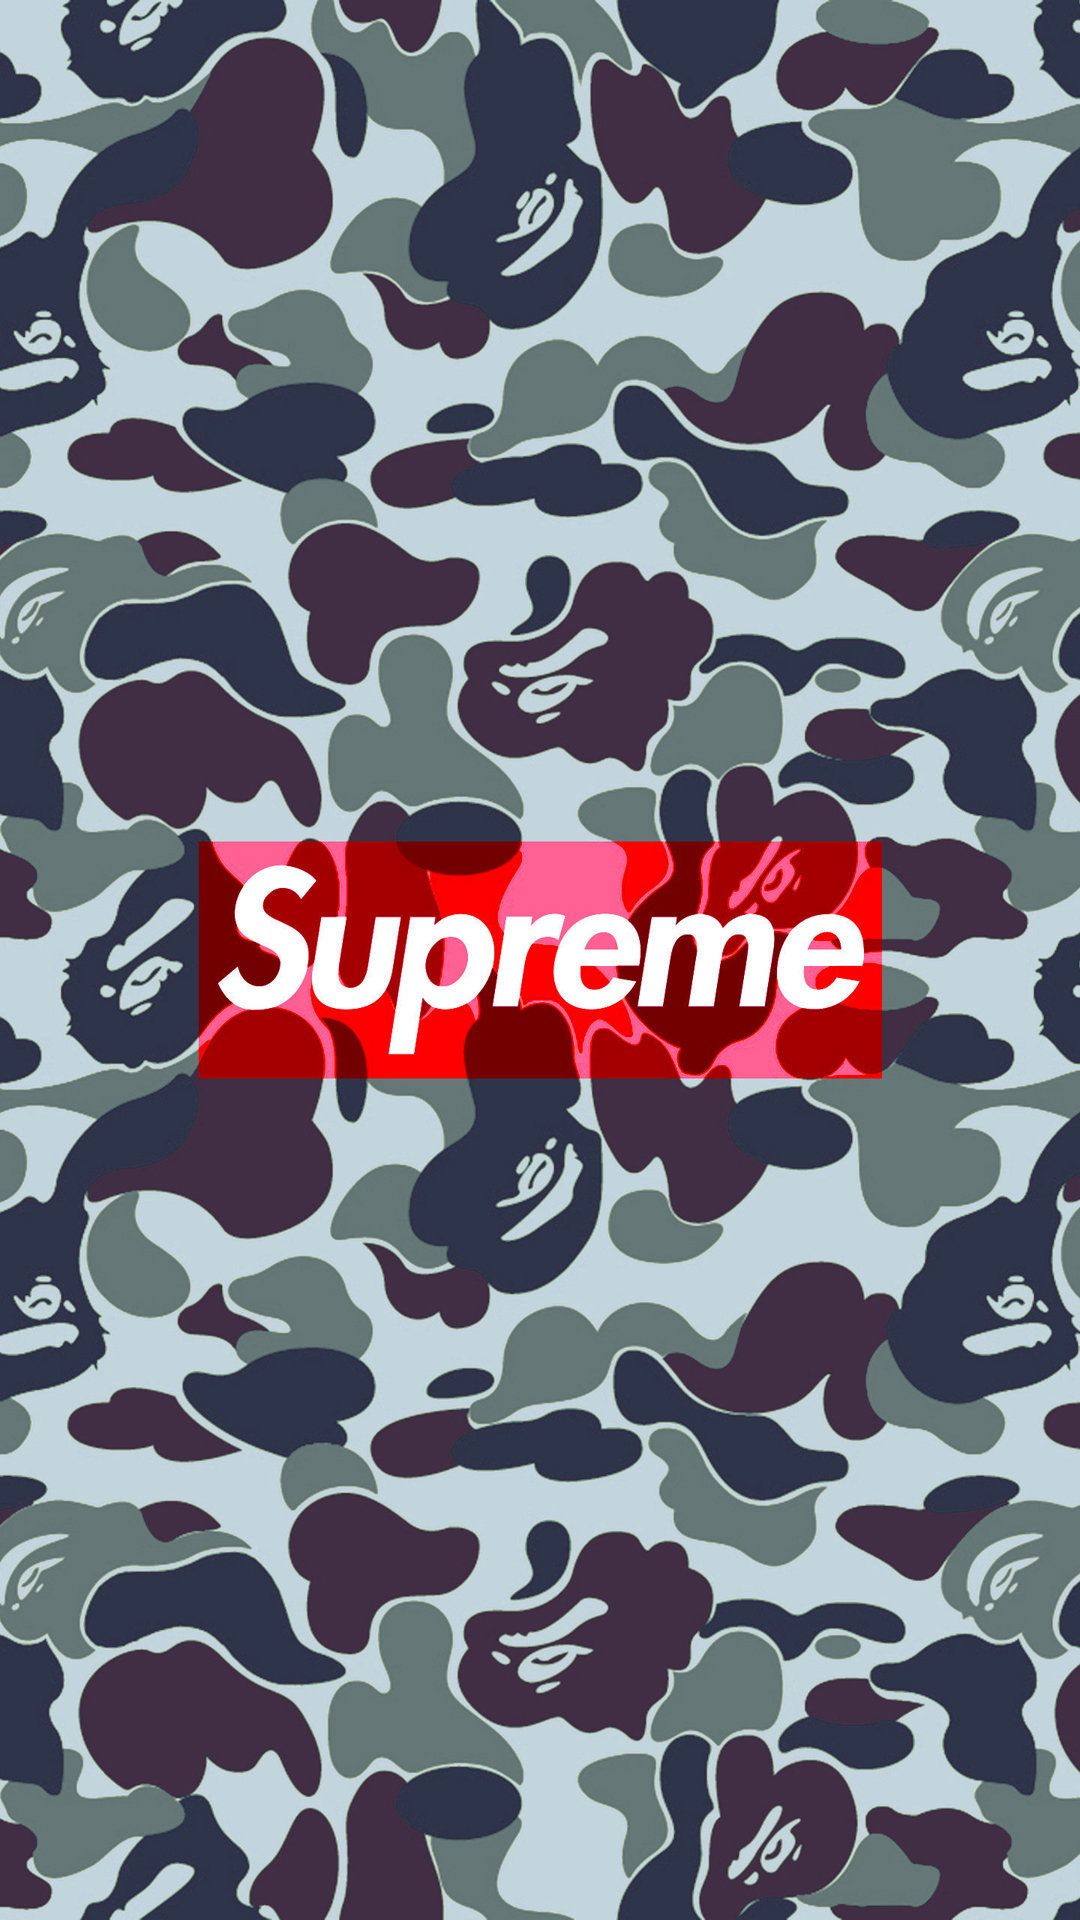 Free Download Stussy Wallpaper Iphone X Palace Skateboards Wallpaper Supreme 1080x19 For Your Desktop Mobile Tablet Explore 57 Spungbob Supreme Iphone Wallpaper Spungbob Supreme Iphone Wallpaper Supreme Iphone Wallpapers